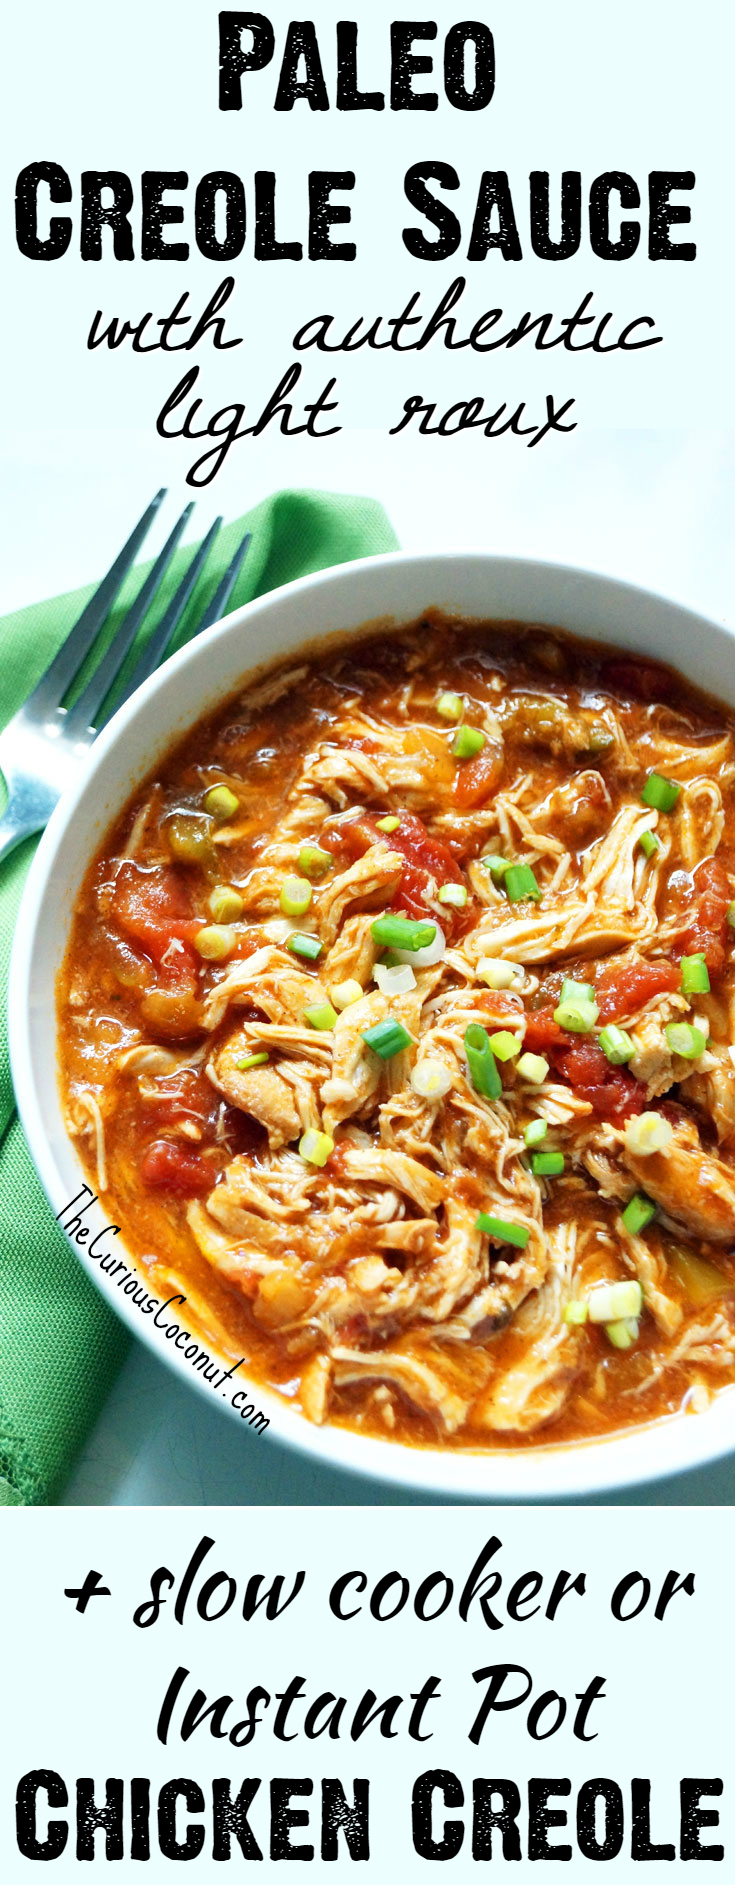 #Paleo Creole Sauce with an authentic gluten-free, grain-free roux + how to make chicken Creole in the slow cooker or Instant Pot! // TheCuriousCoconut.com